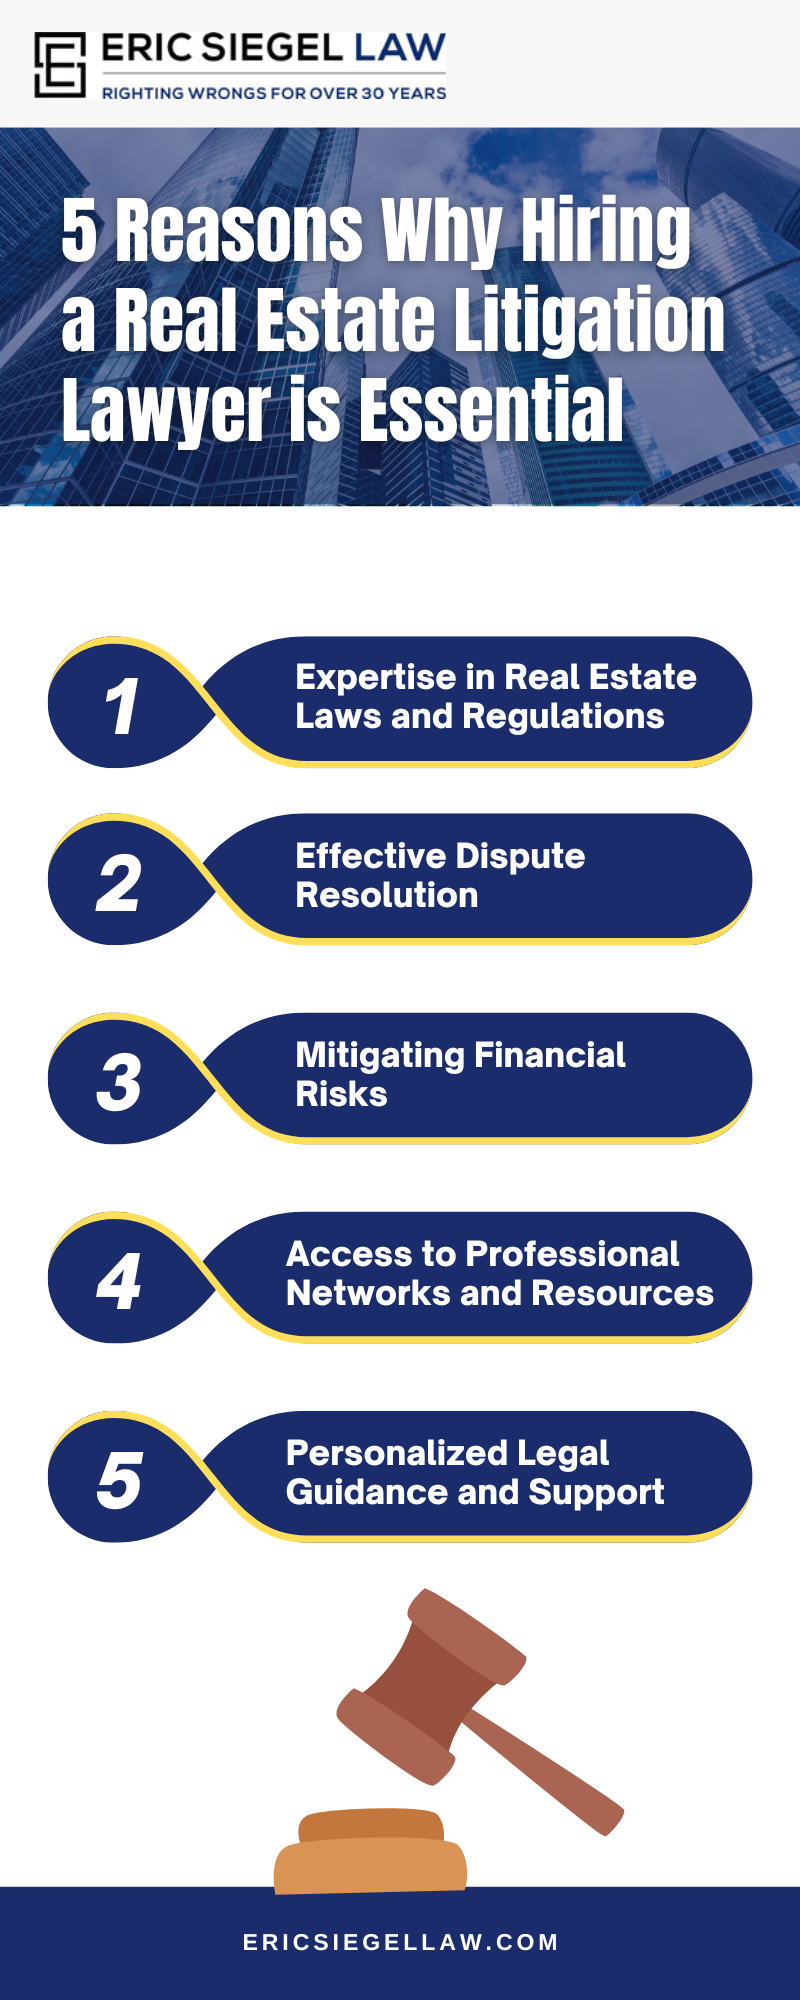 5 Reasons Why Hiring A Real Estate Litigation Lawyer Is Essential Infographic